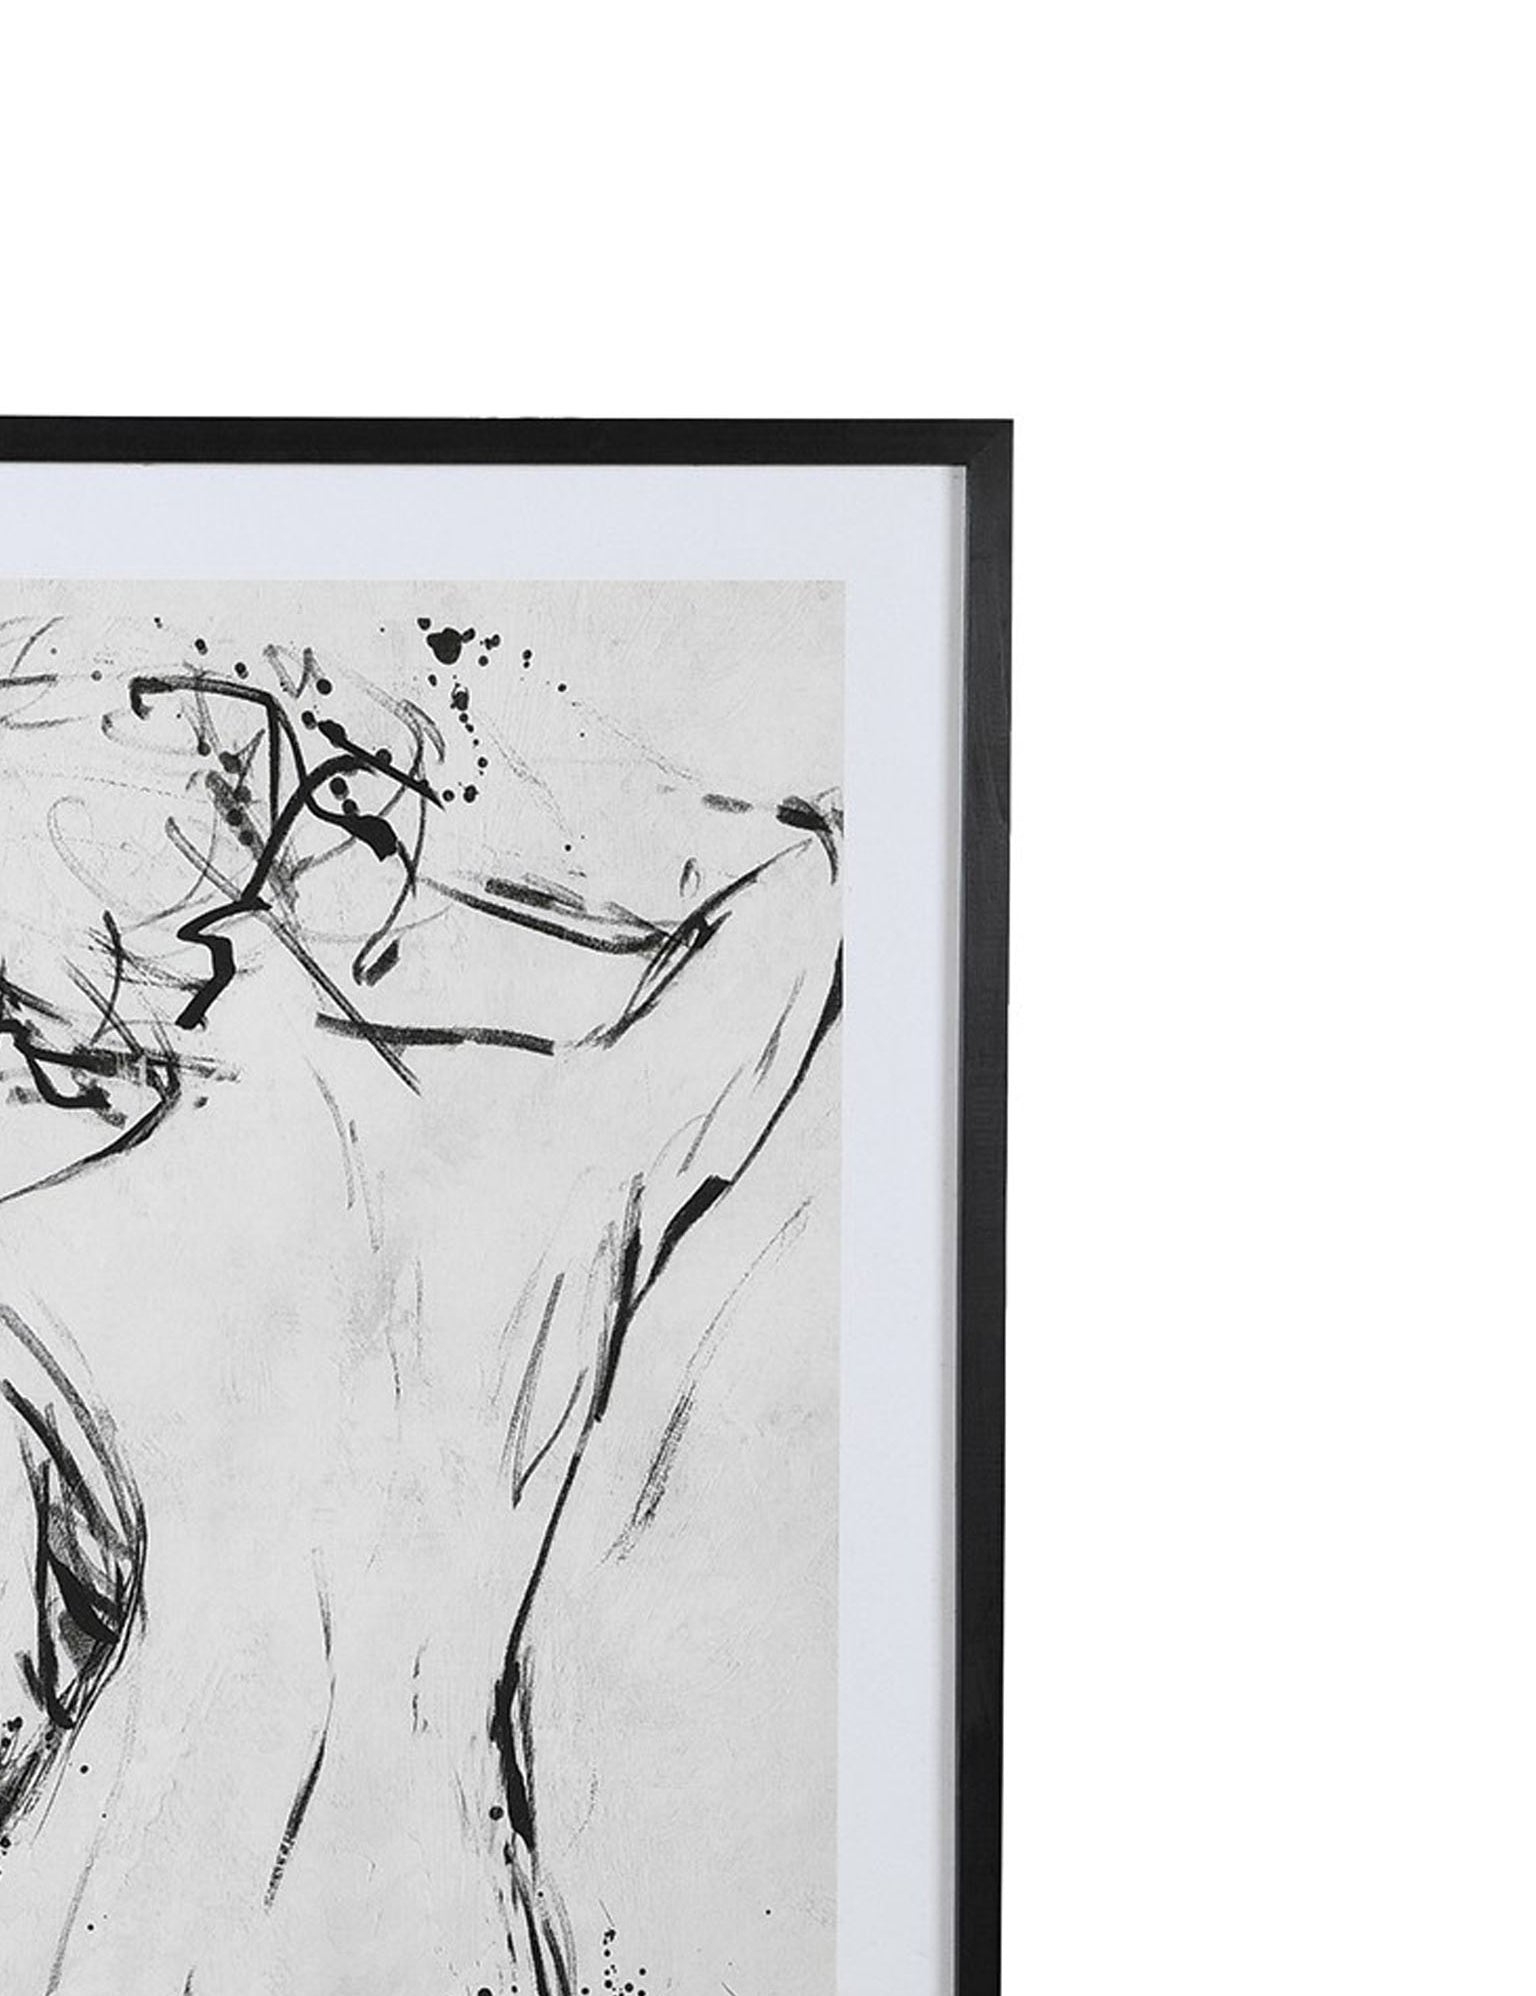 black and white sketch of nude